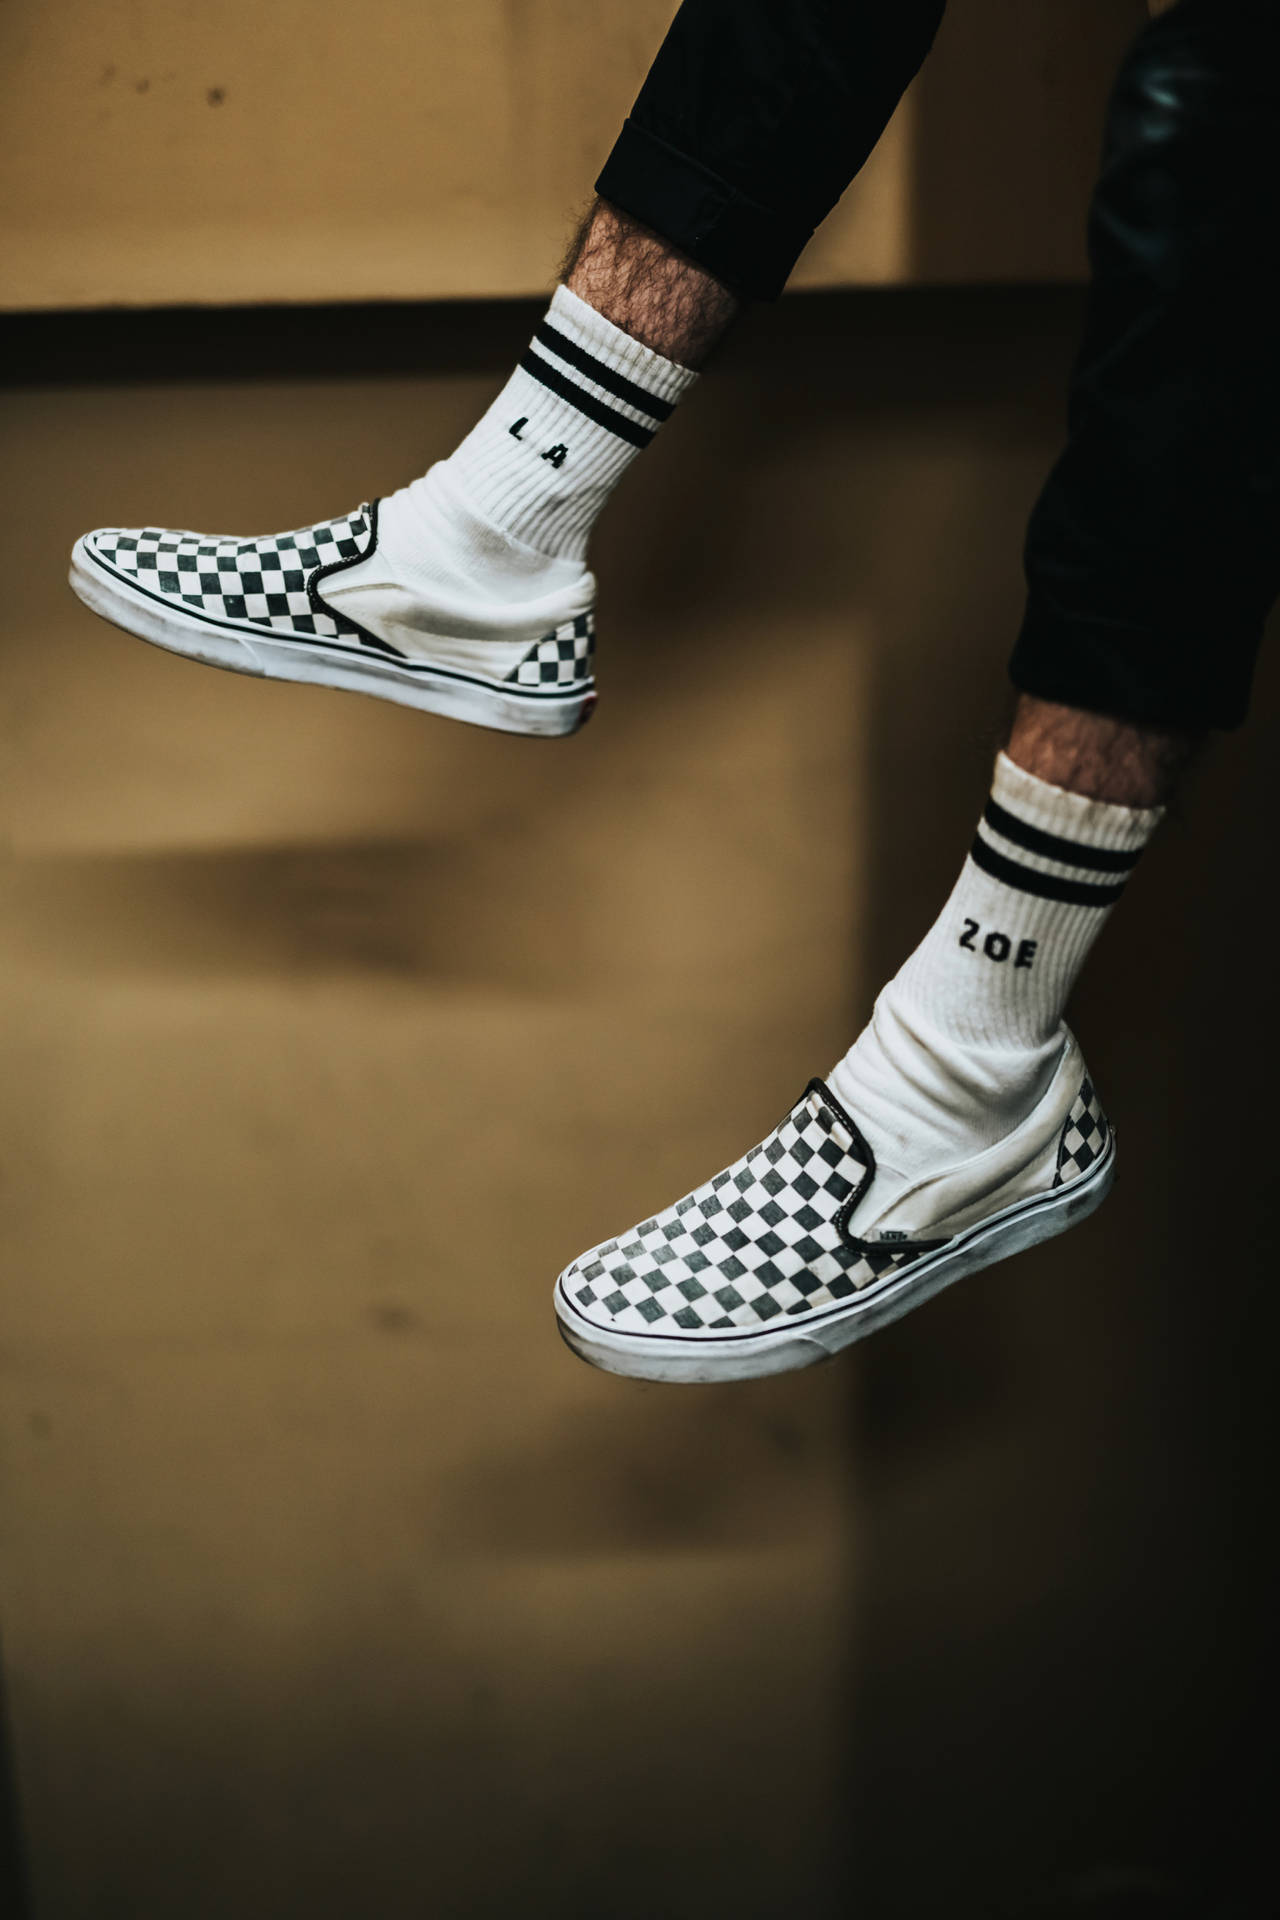 Vans 1536X2304 Wallpaper and Background Image